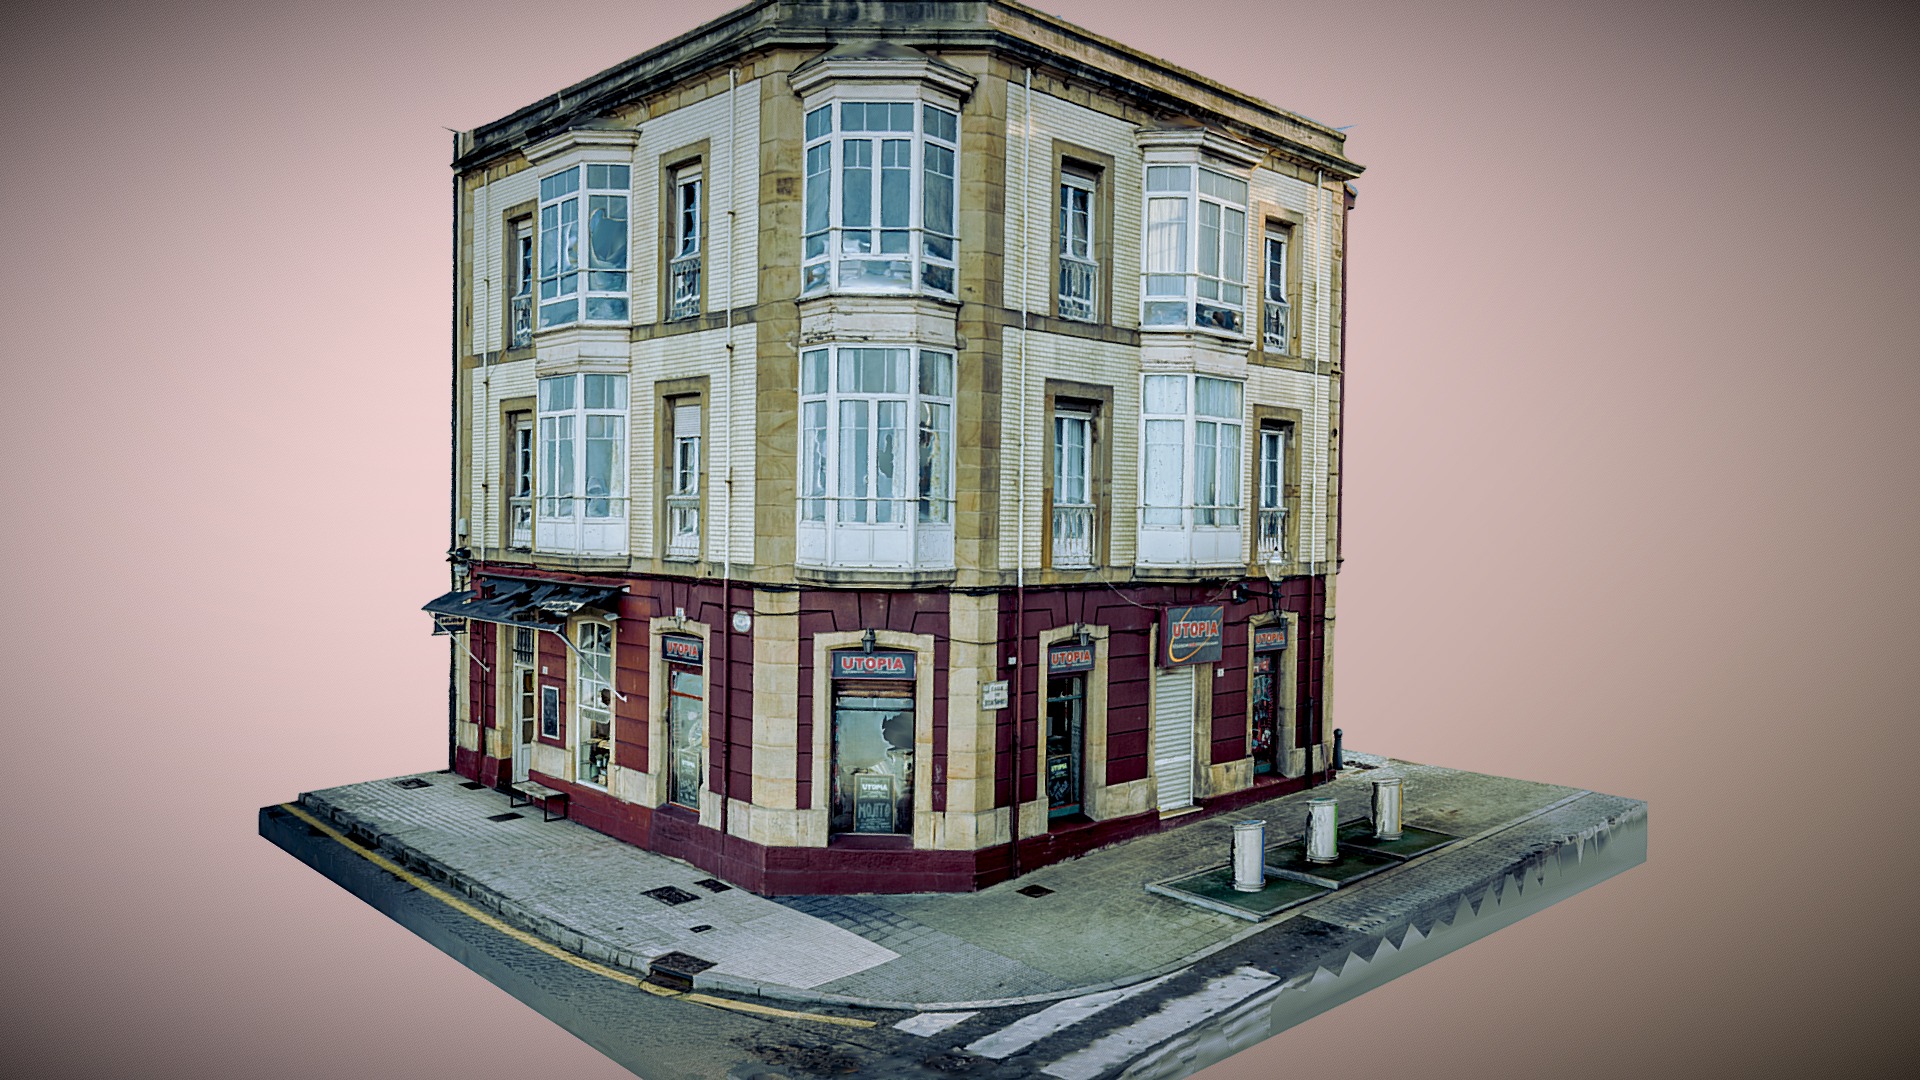 3D model Utopia building raw photogrammetry scan - This is a 3D model of the Utopia building raw photogrammetry scan. The 3D model is about a painting of a building.